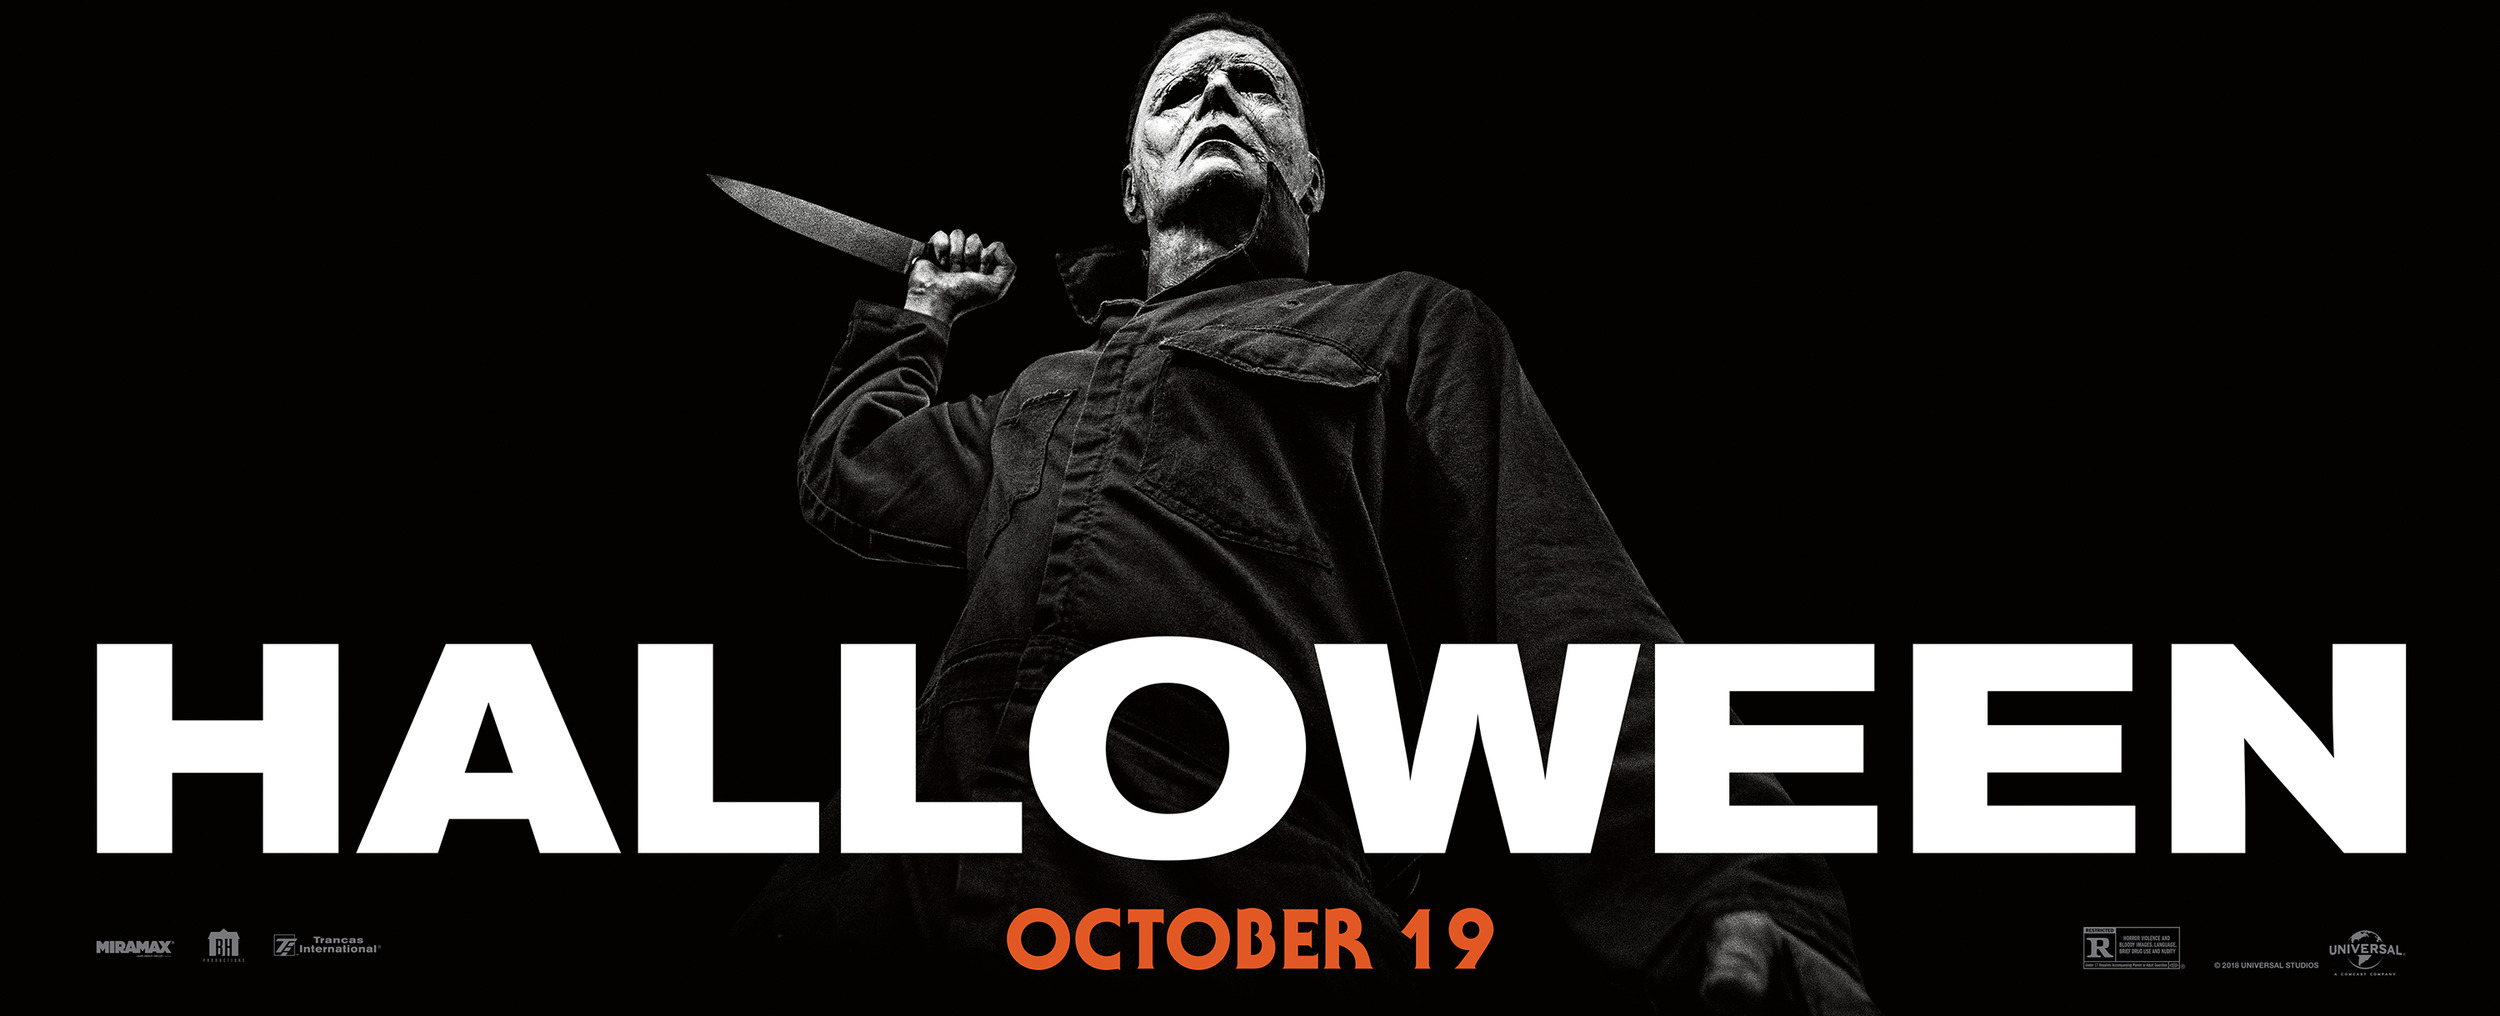 Mega Sized Movie Poster Image for Halloween (#7 of 7)